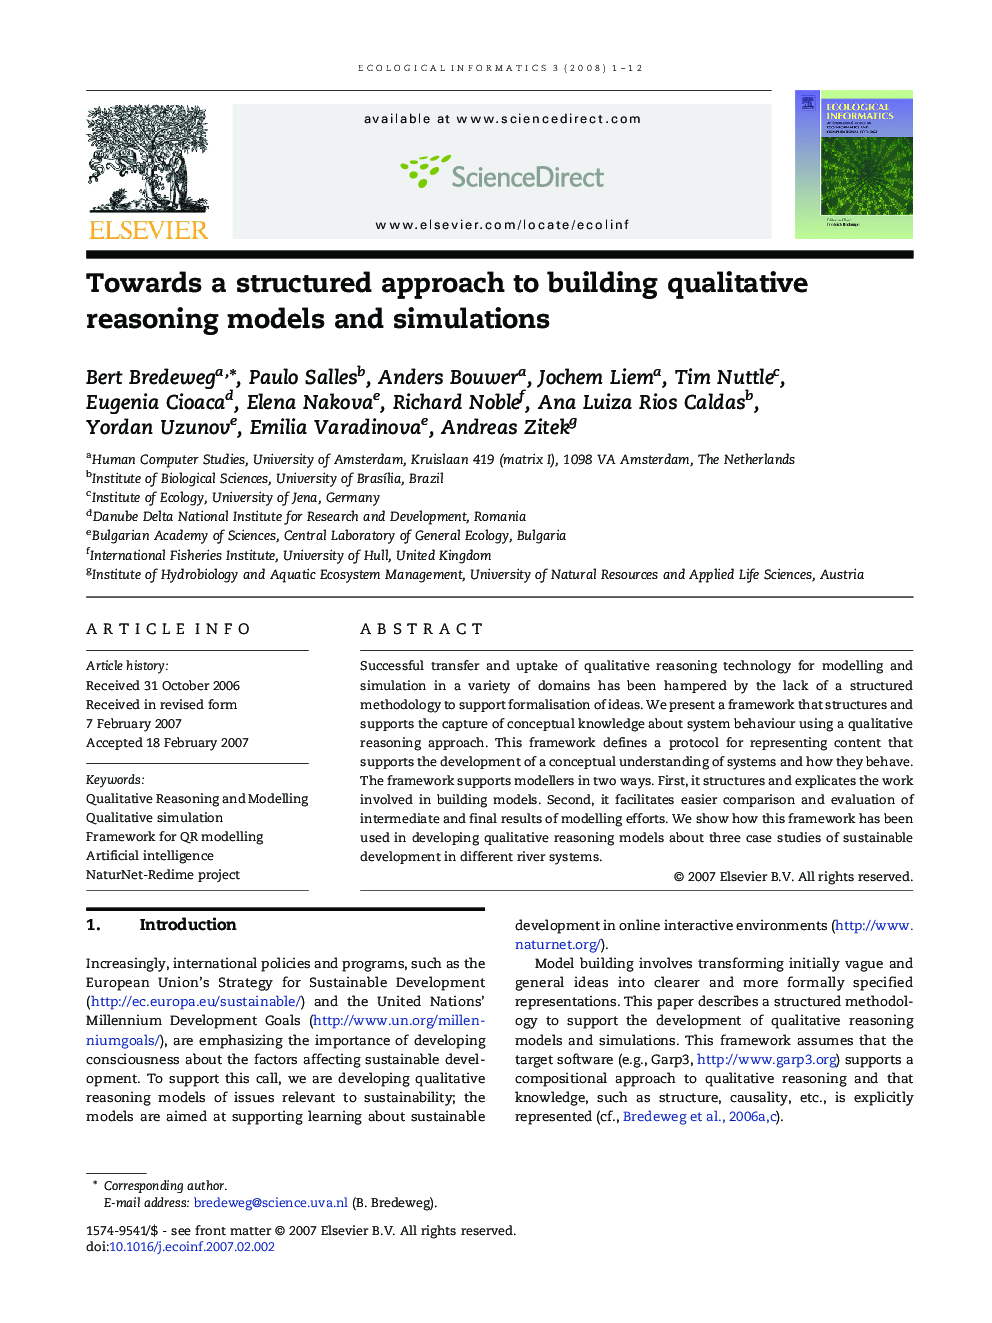 Towards a structured approach to building qualitative reasoning models and simulations